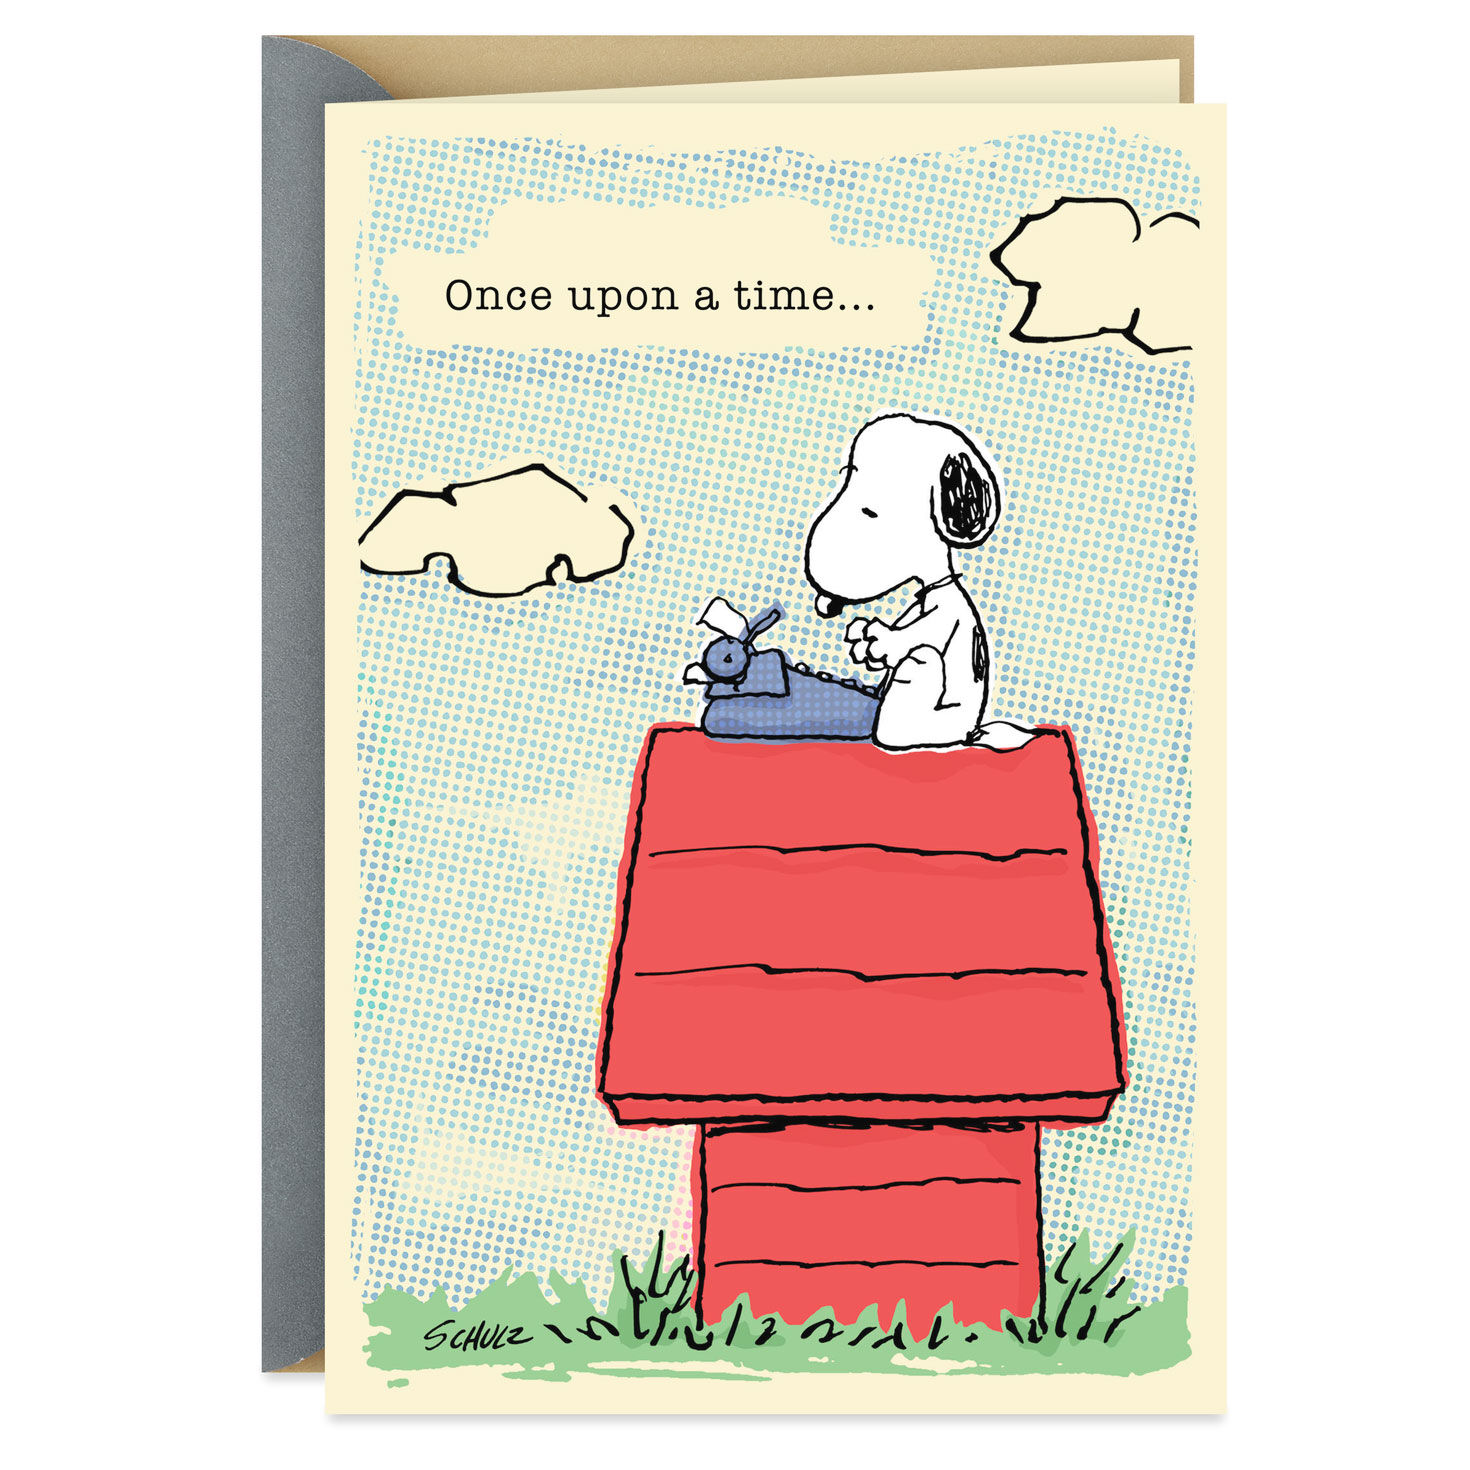 Peanuts Snoopy Happily Ever After Anniversary Card Greeting Cards Hallmark